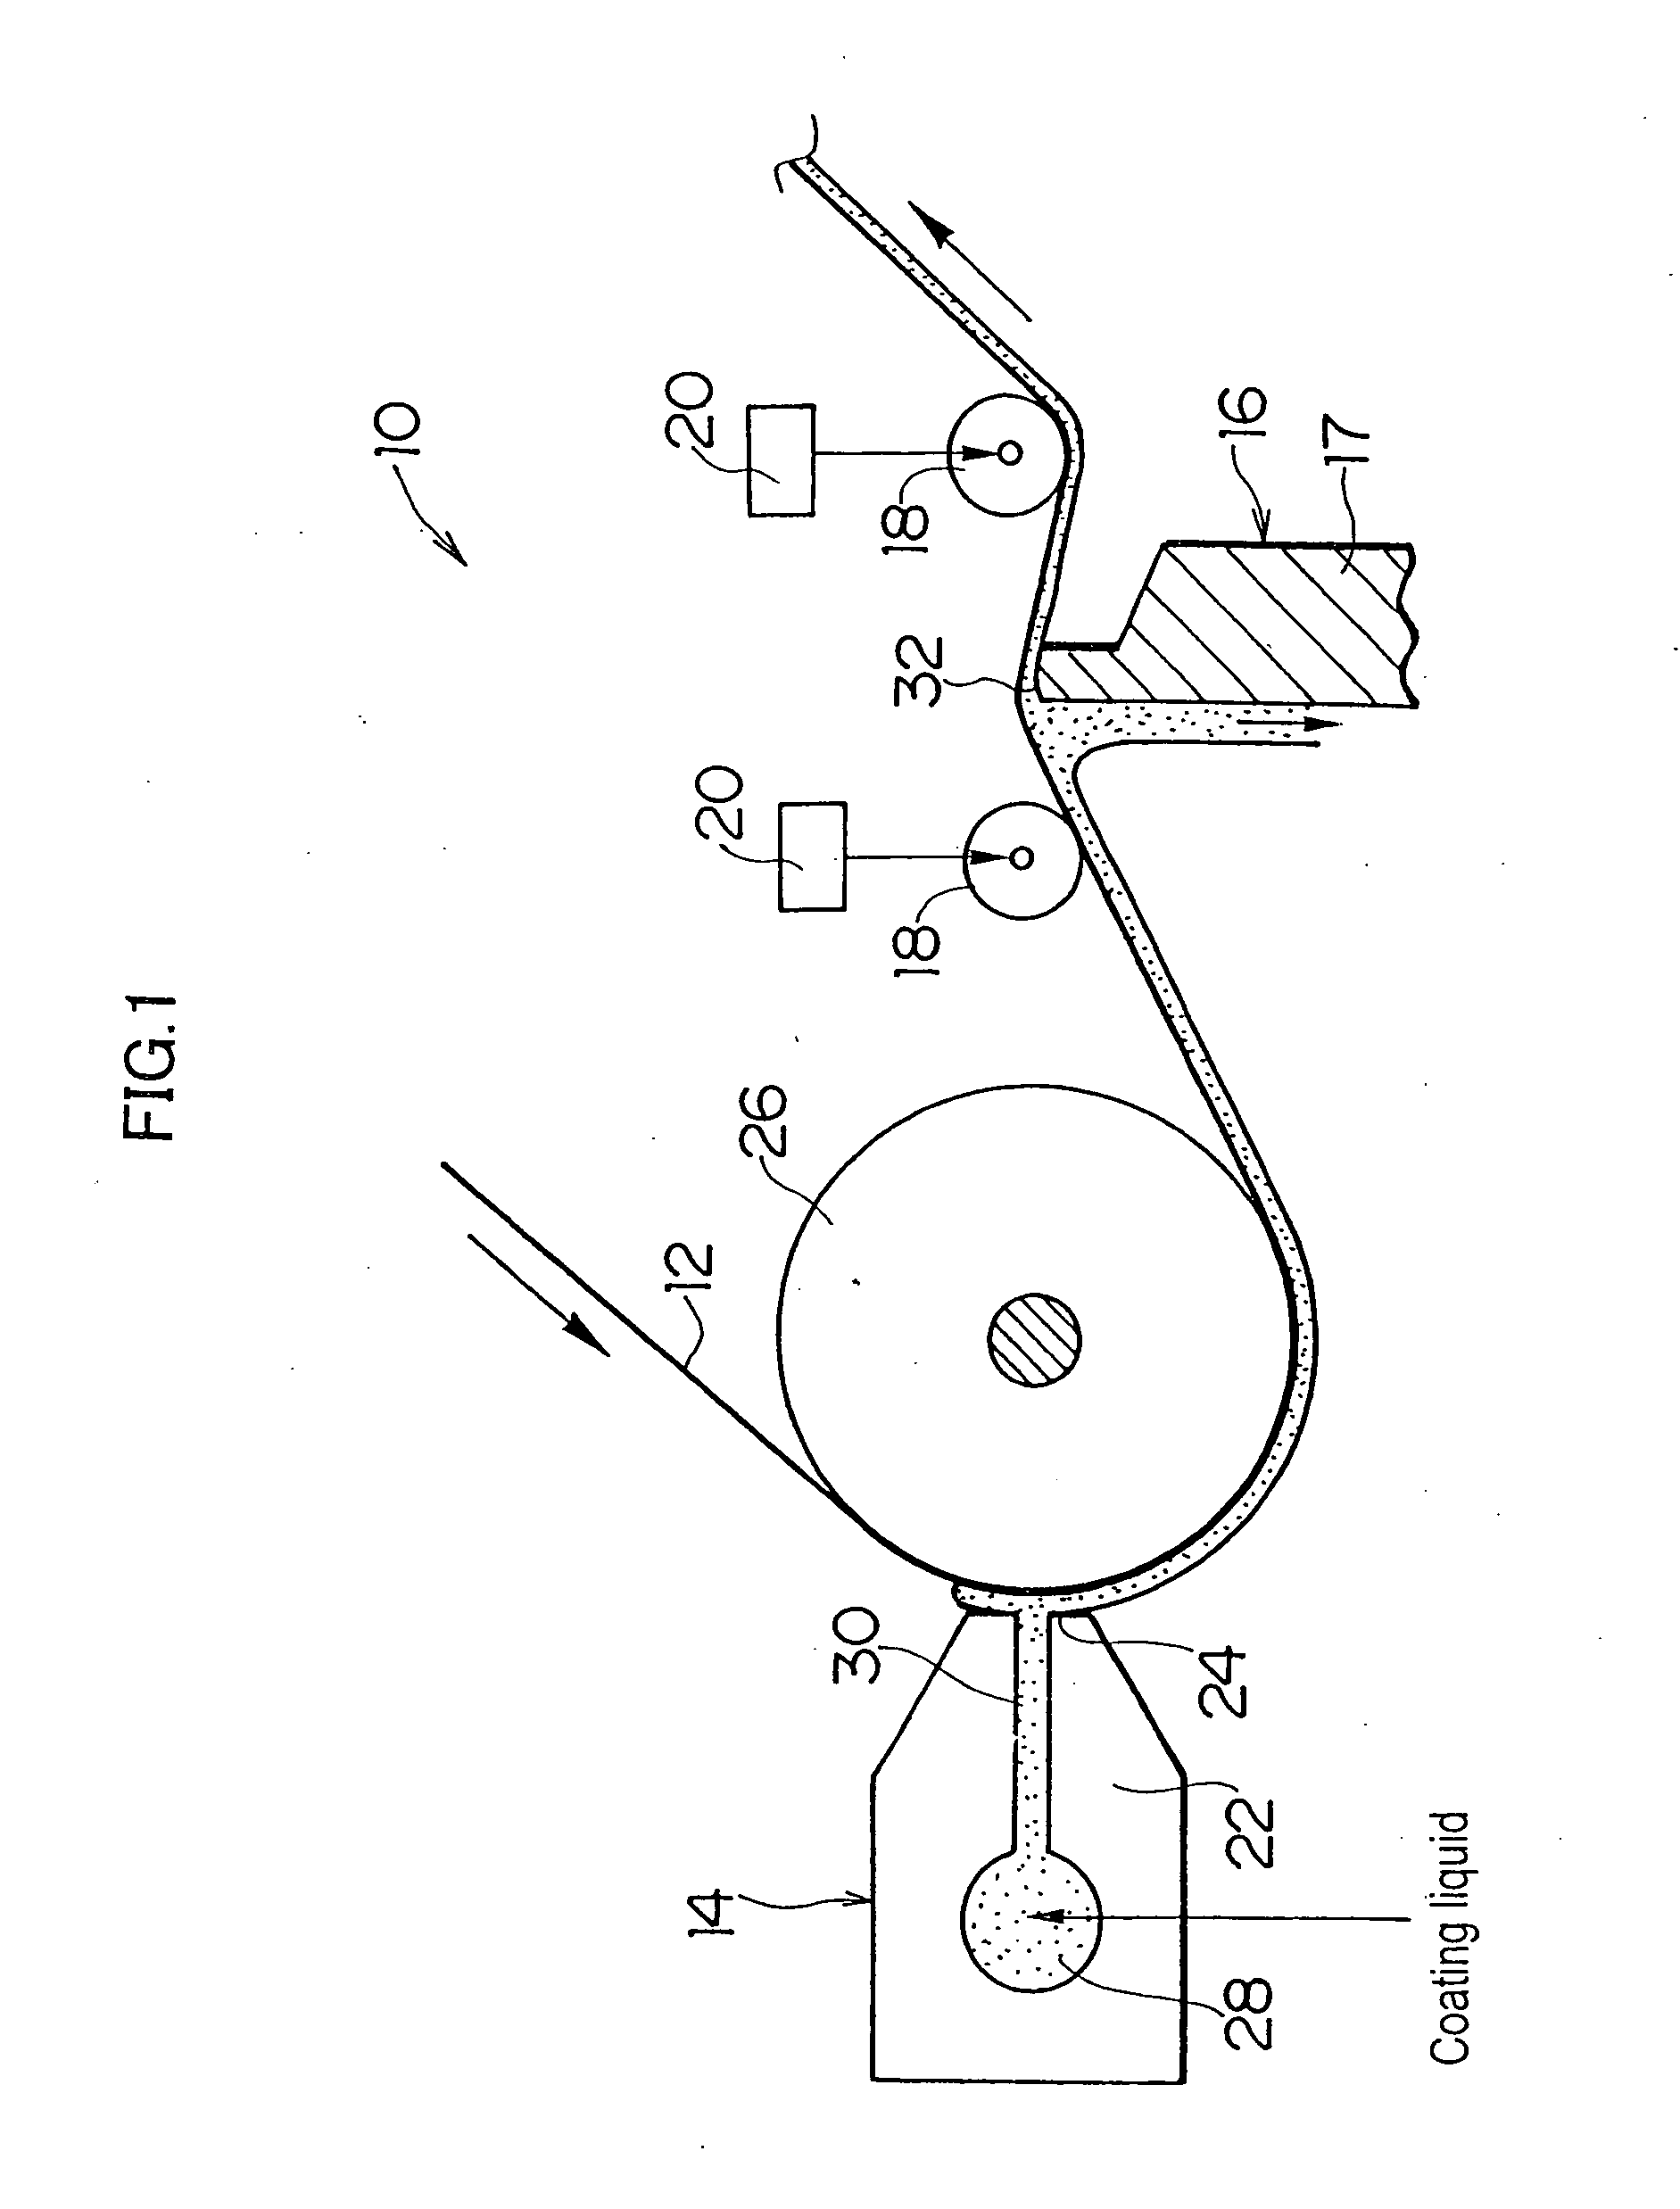 Coating method and apparatus